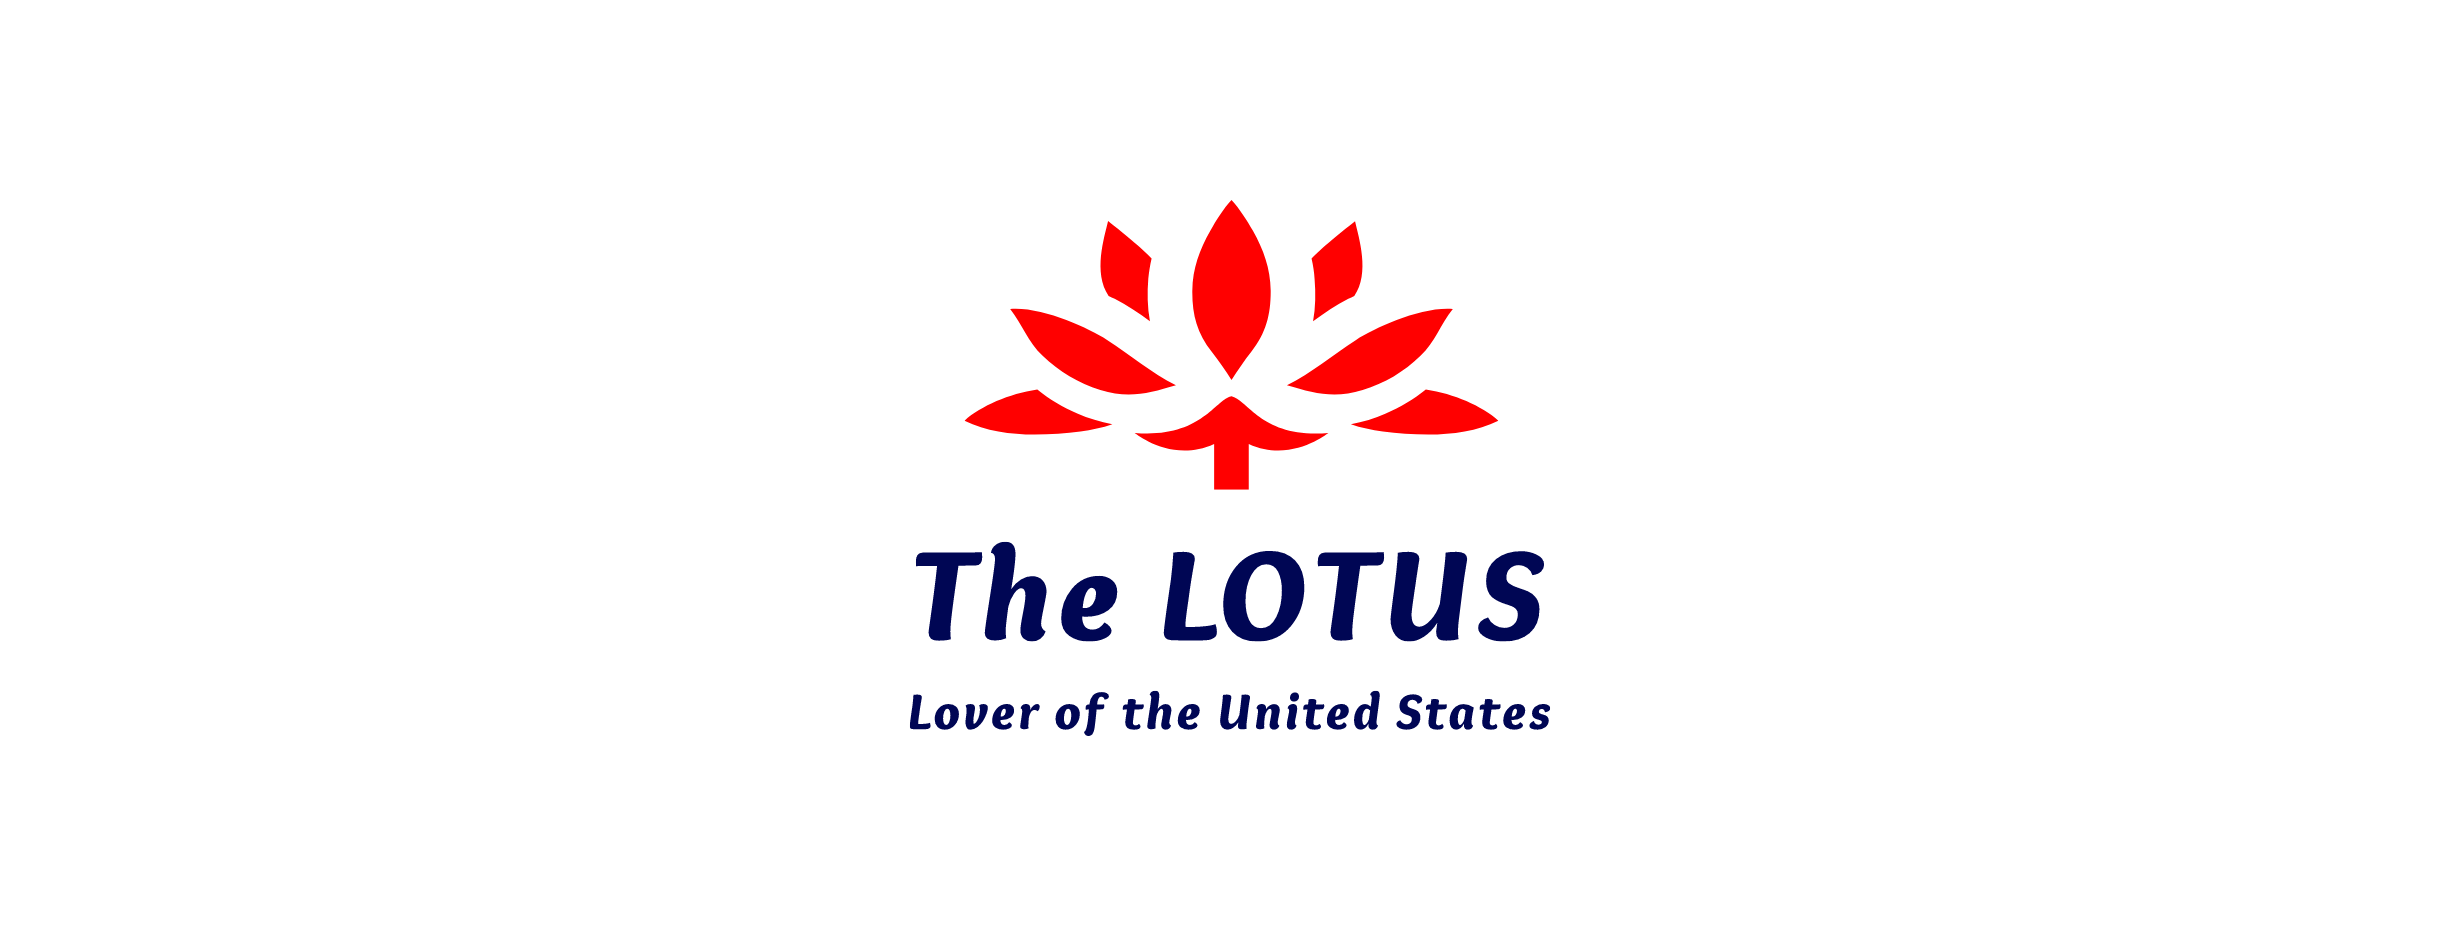 The LOTUS - Lover of the United States